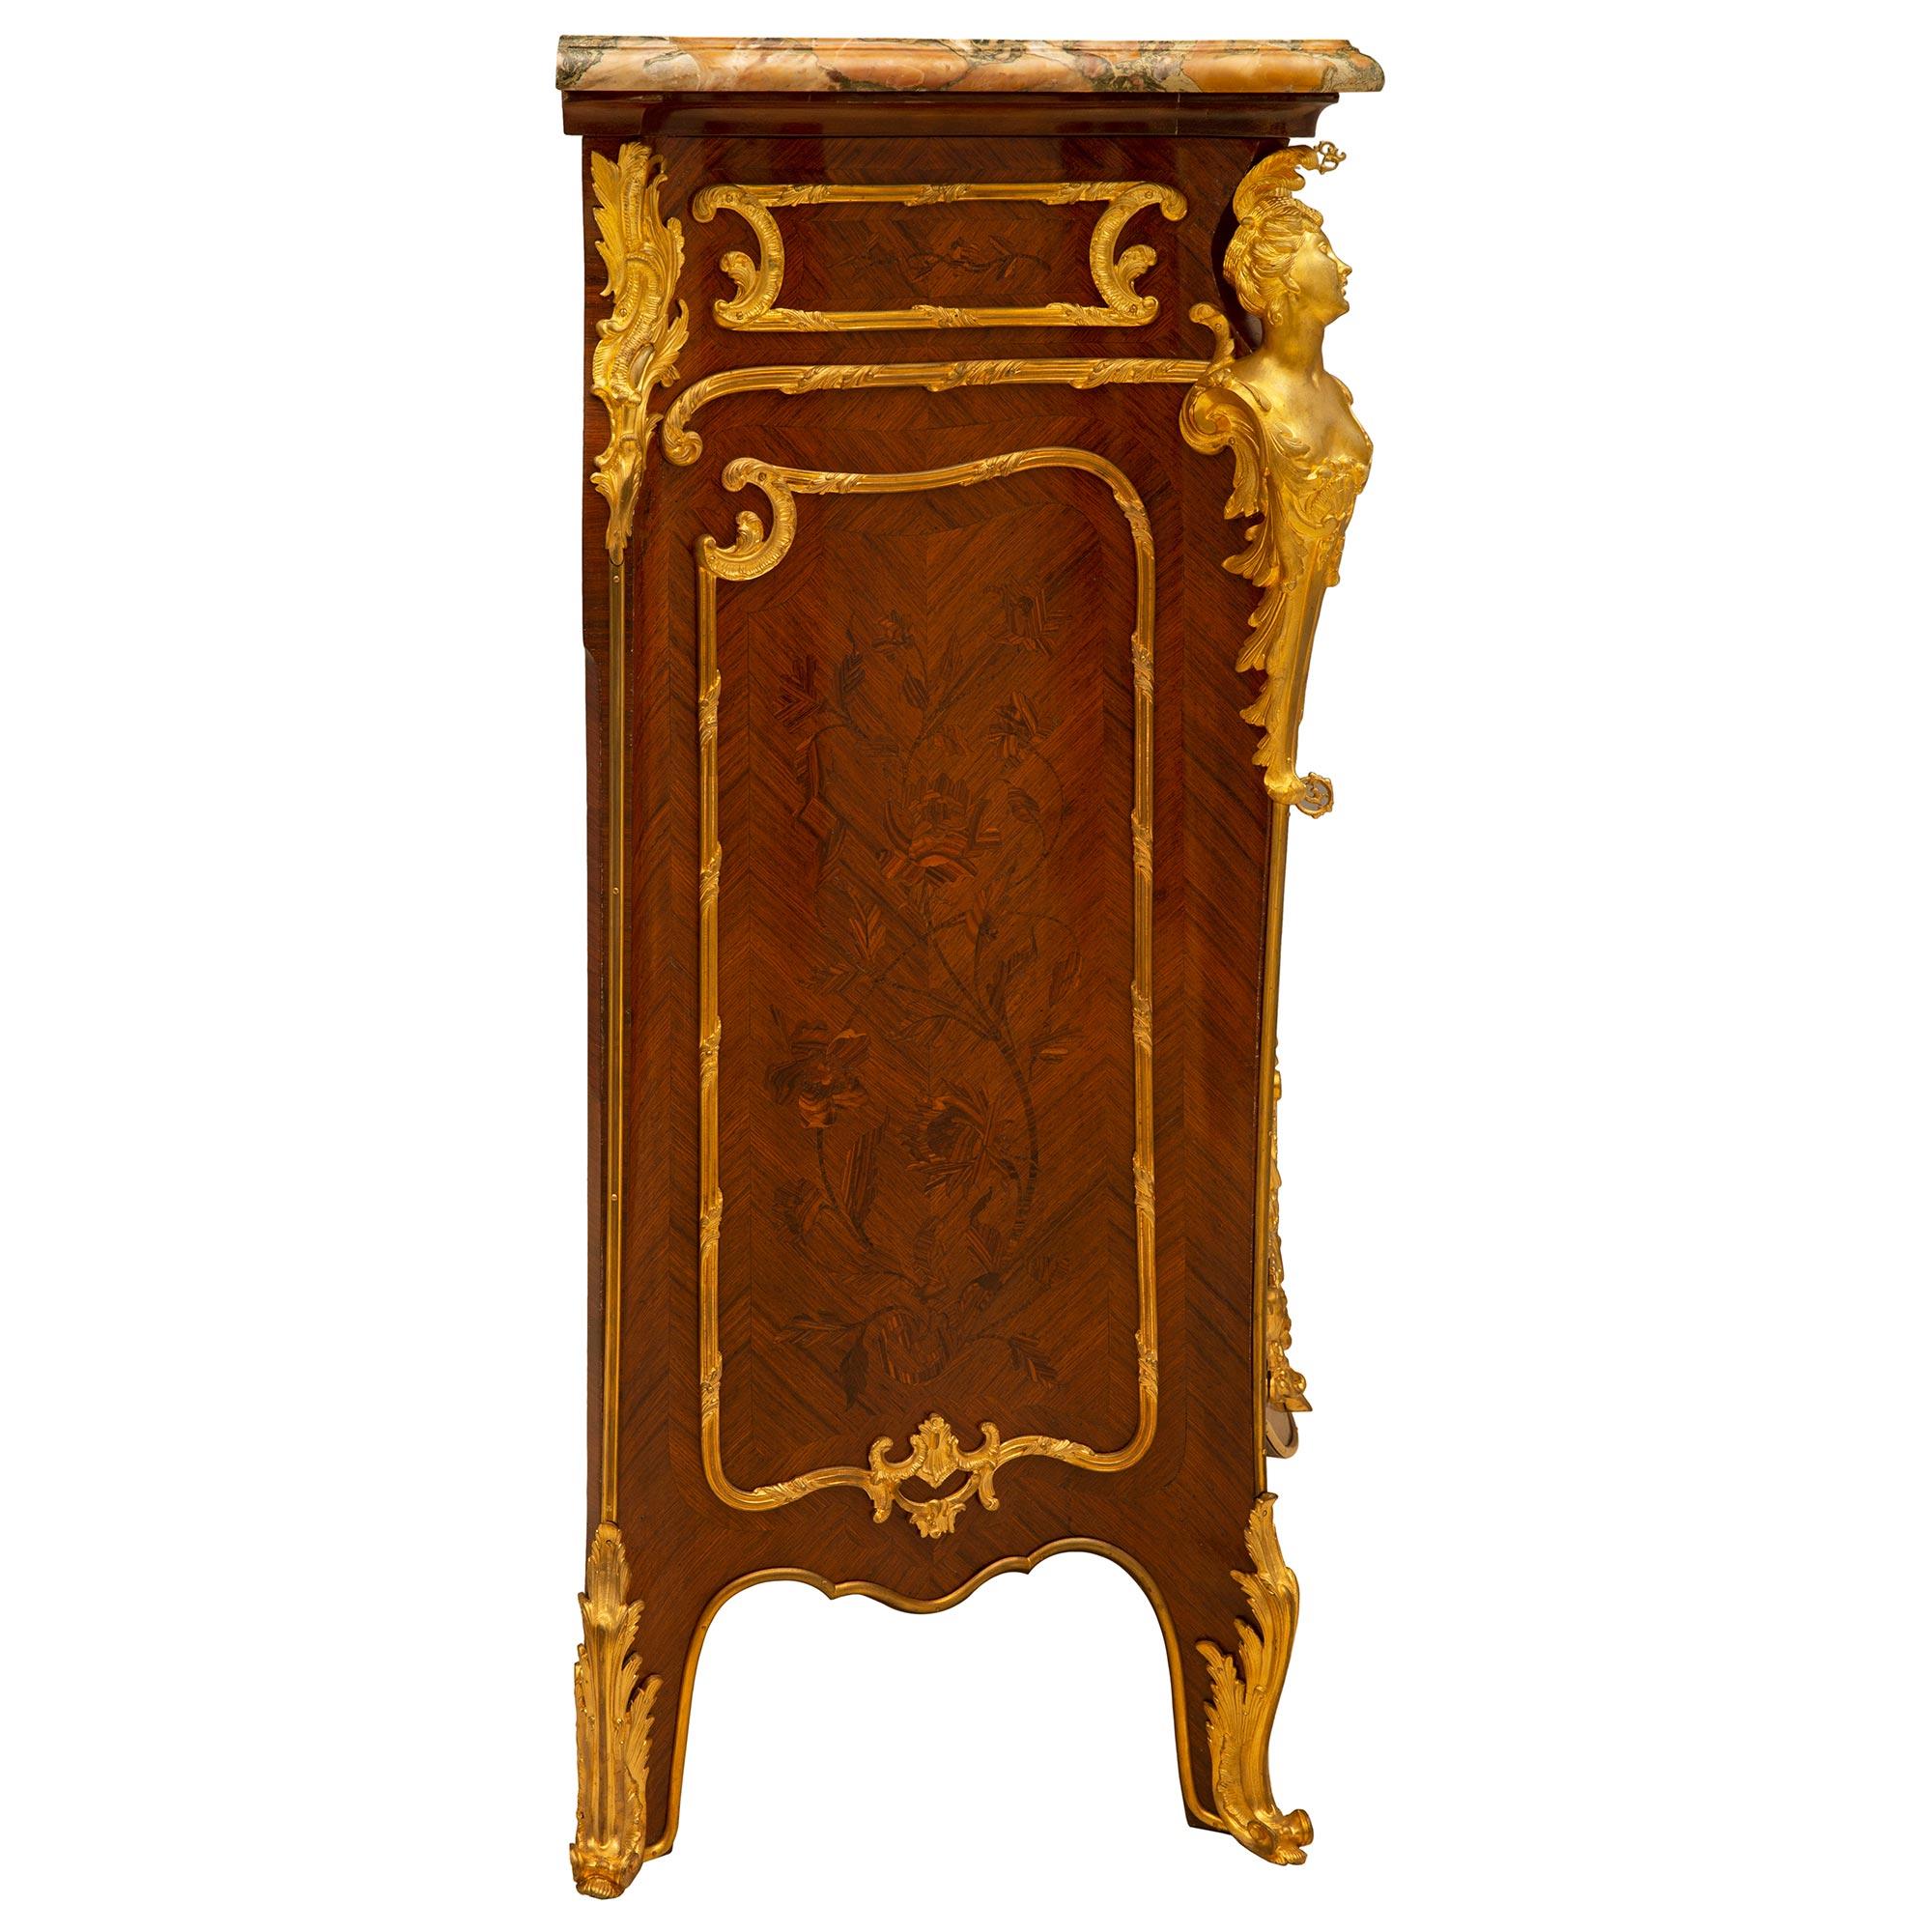 French 19th Century Louis XV Style Tulipwood Kingwood and Ormolu Cabinet For Sale 1